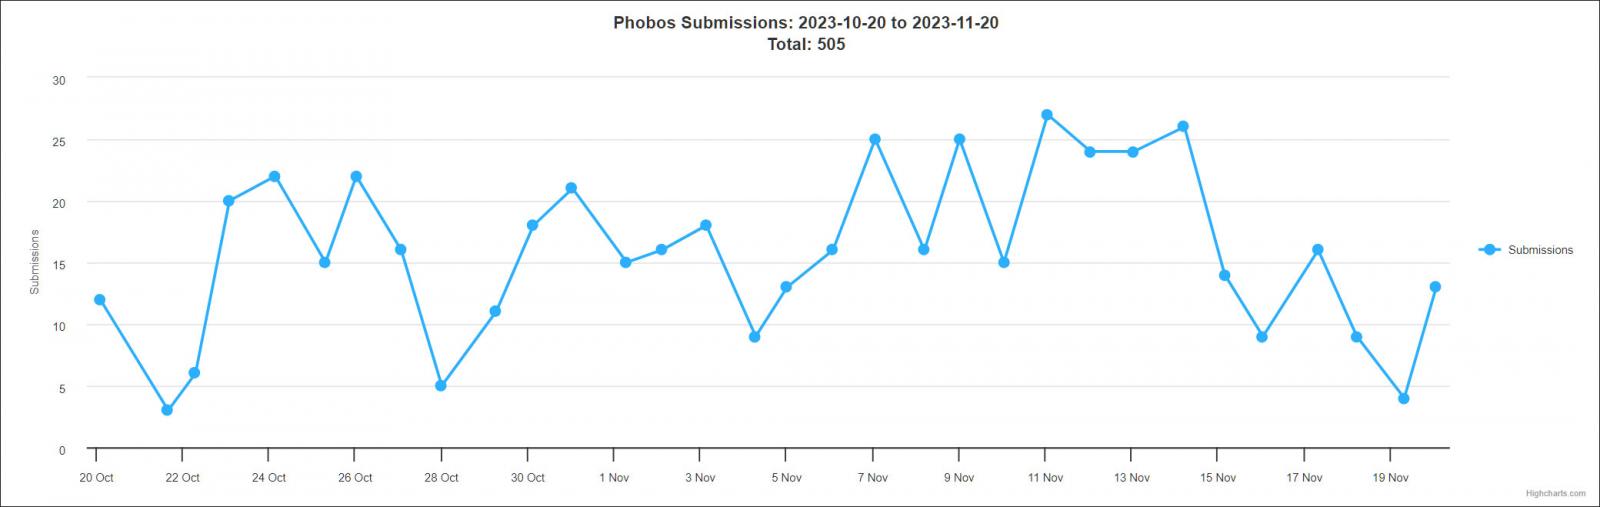 Phobos submissions to ID Ransomware over the past month